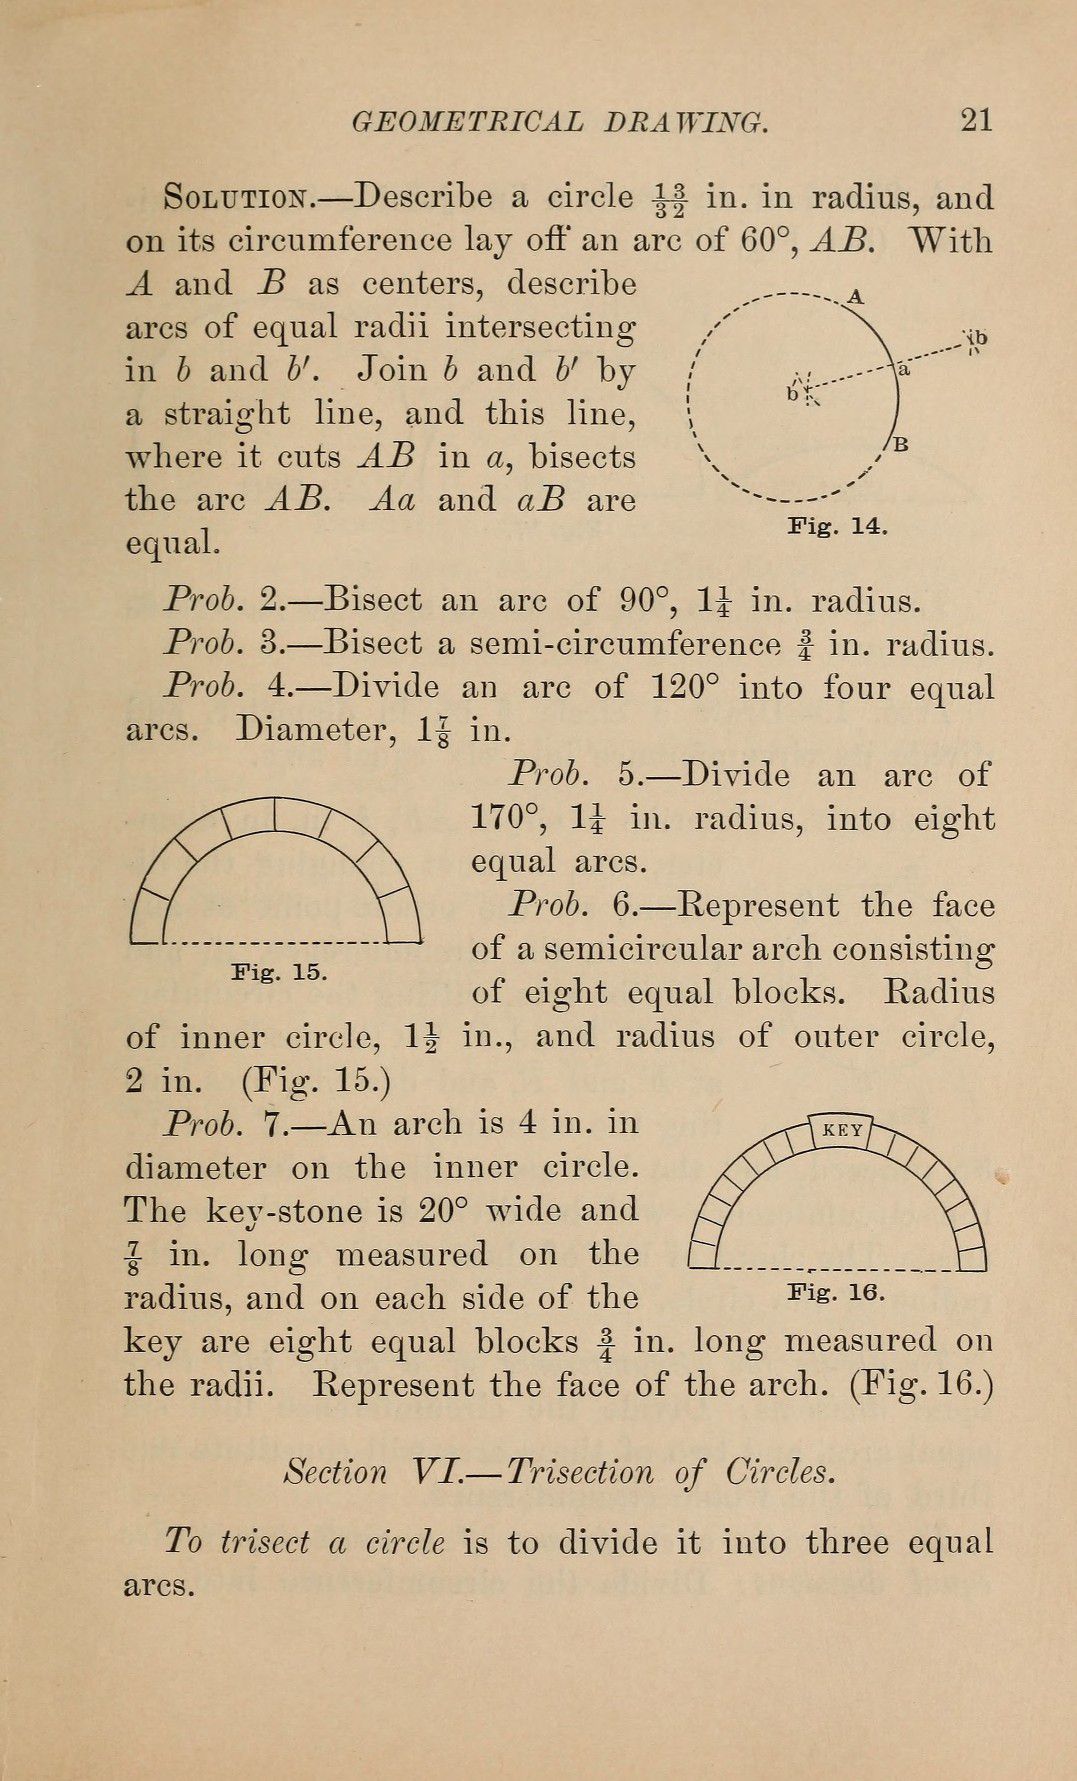 [Frank Aborn] Elementary mechanical drawing, for school and shop [English] 26